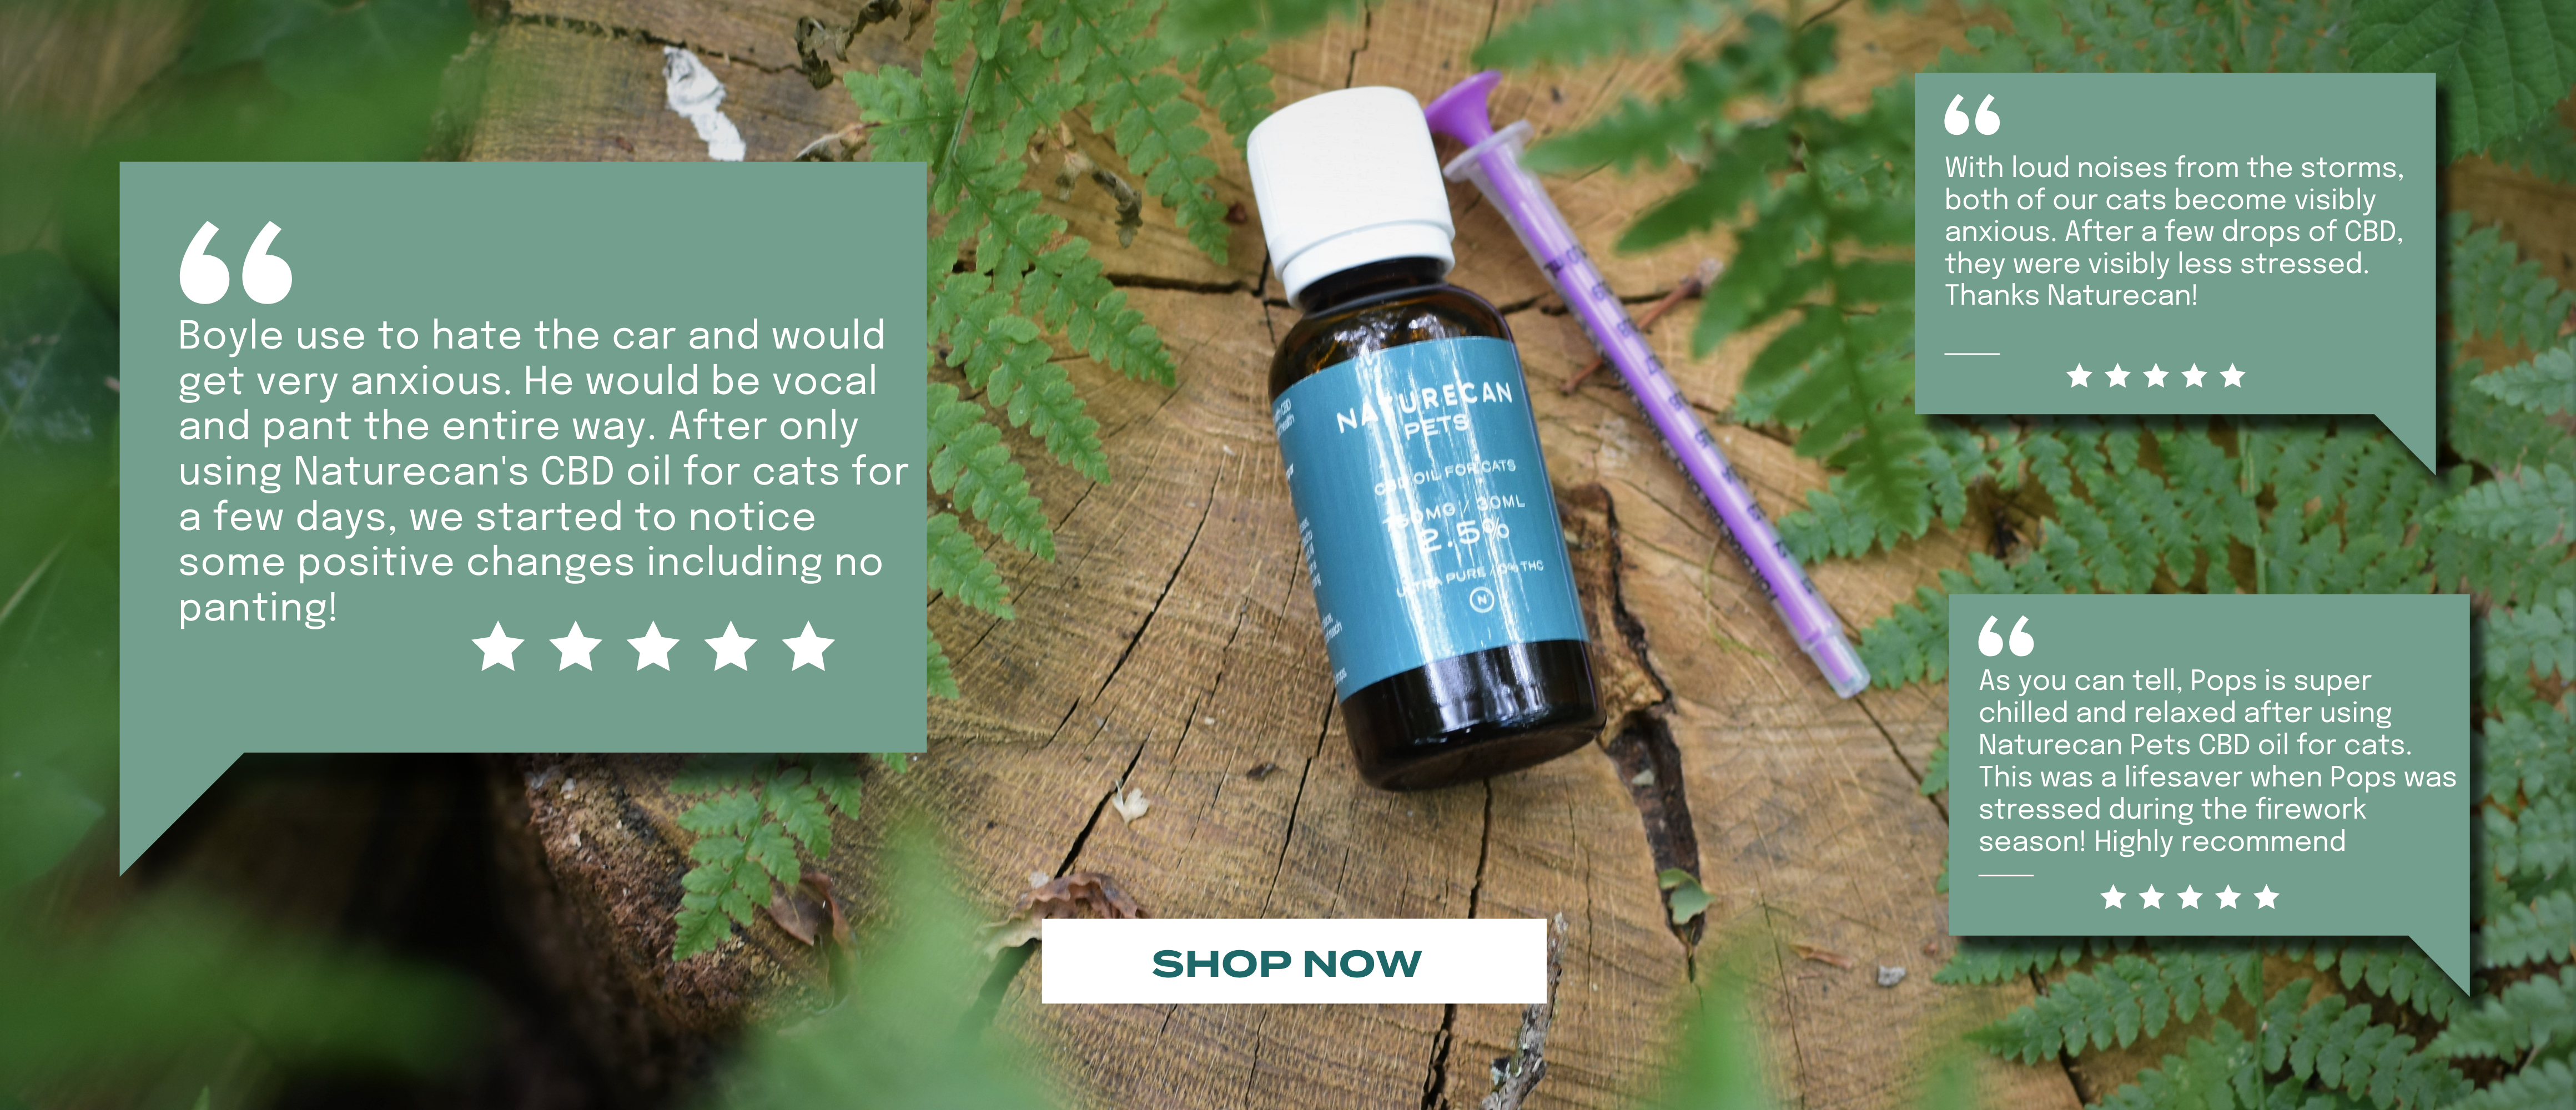 Product shot of CBD oil for cats on a log with 5 star reviews around it